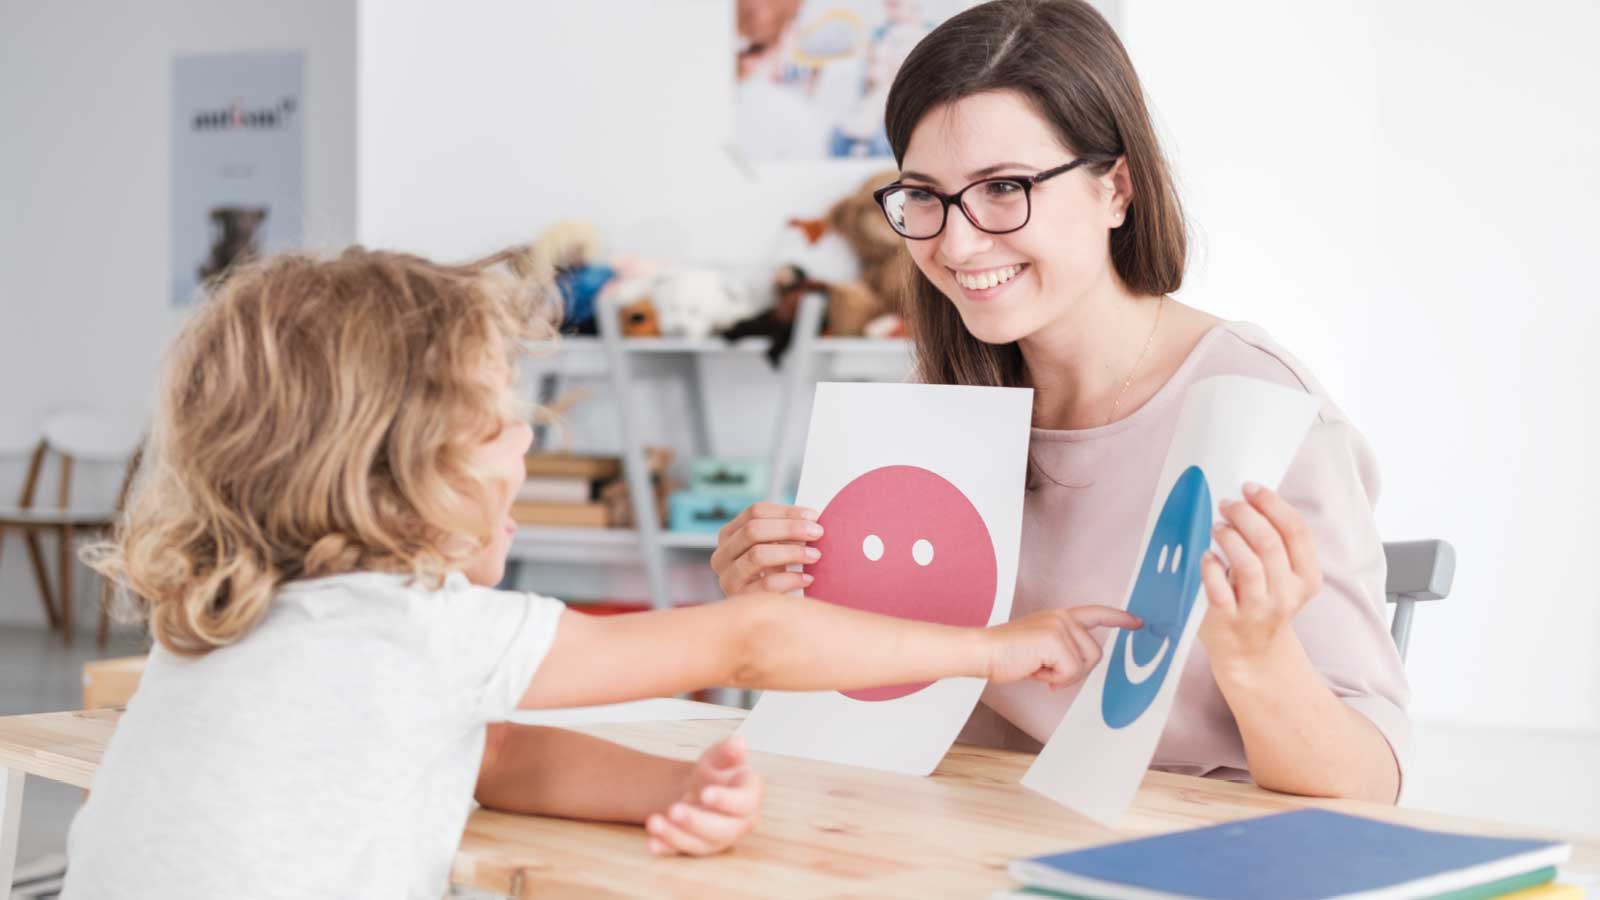 teacher holding up smiley face and sad face to young student